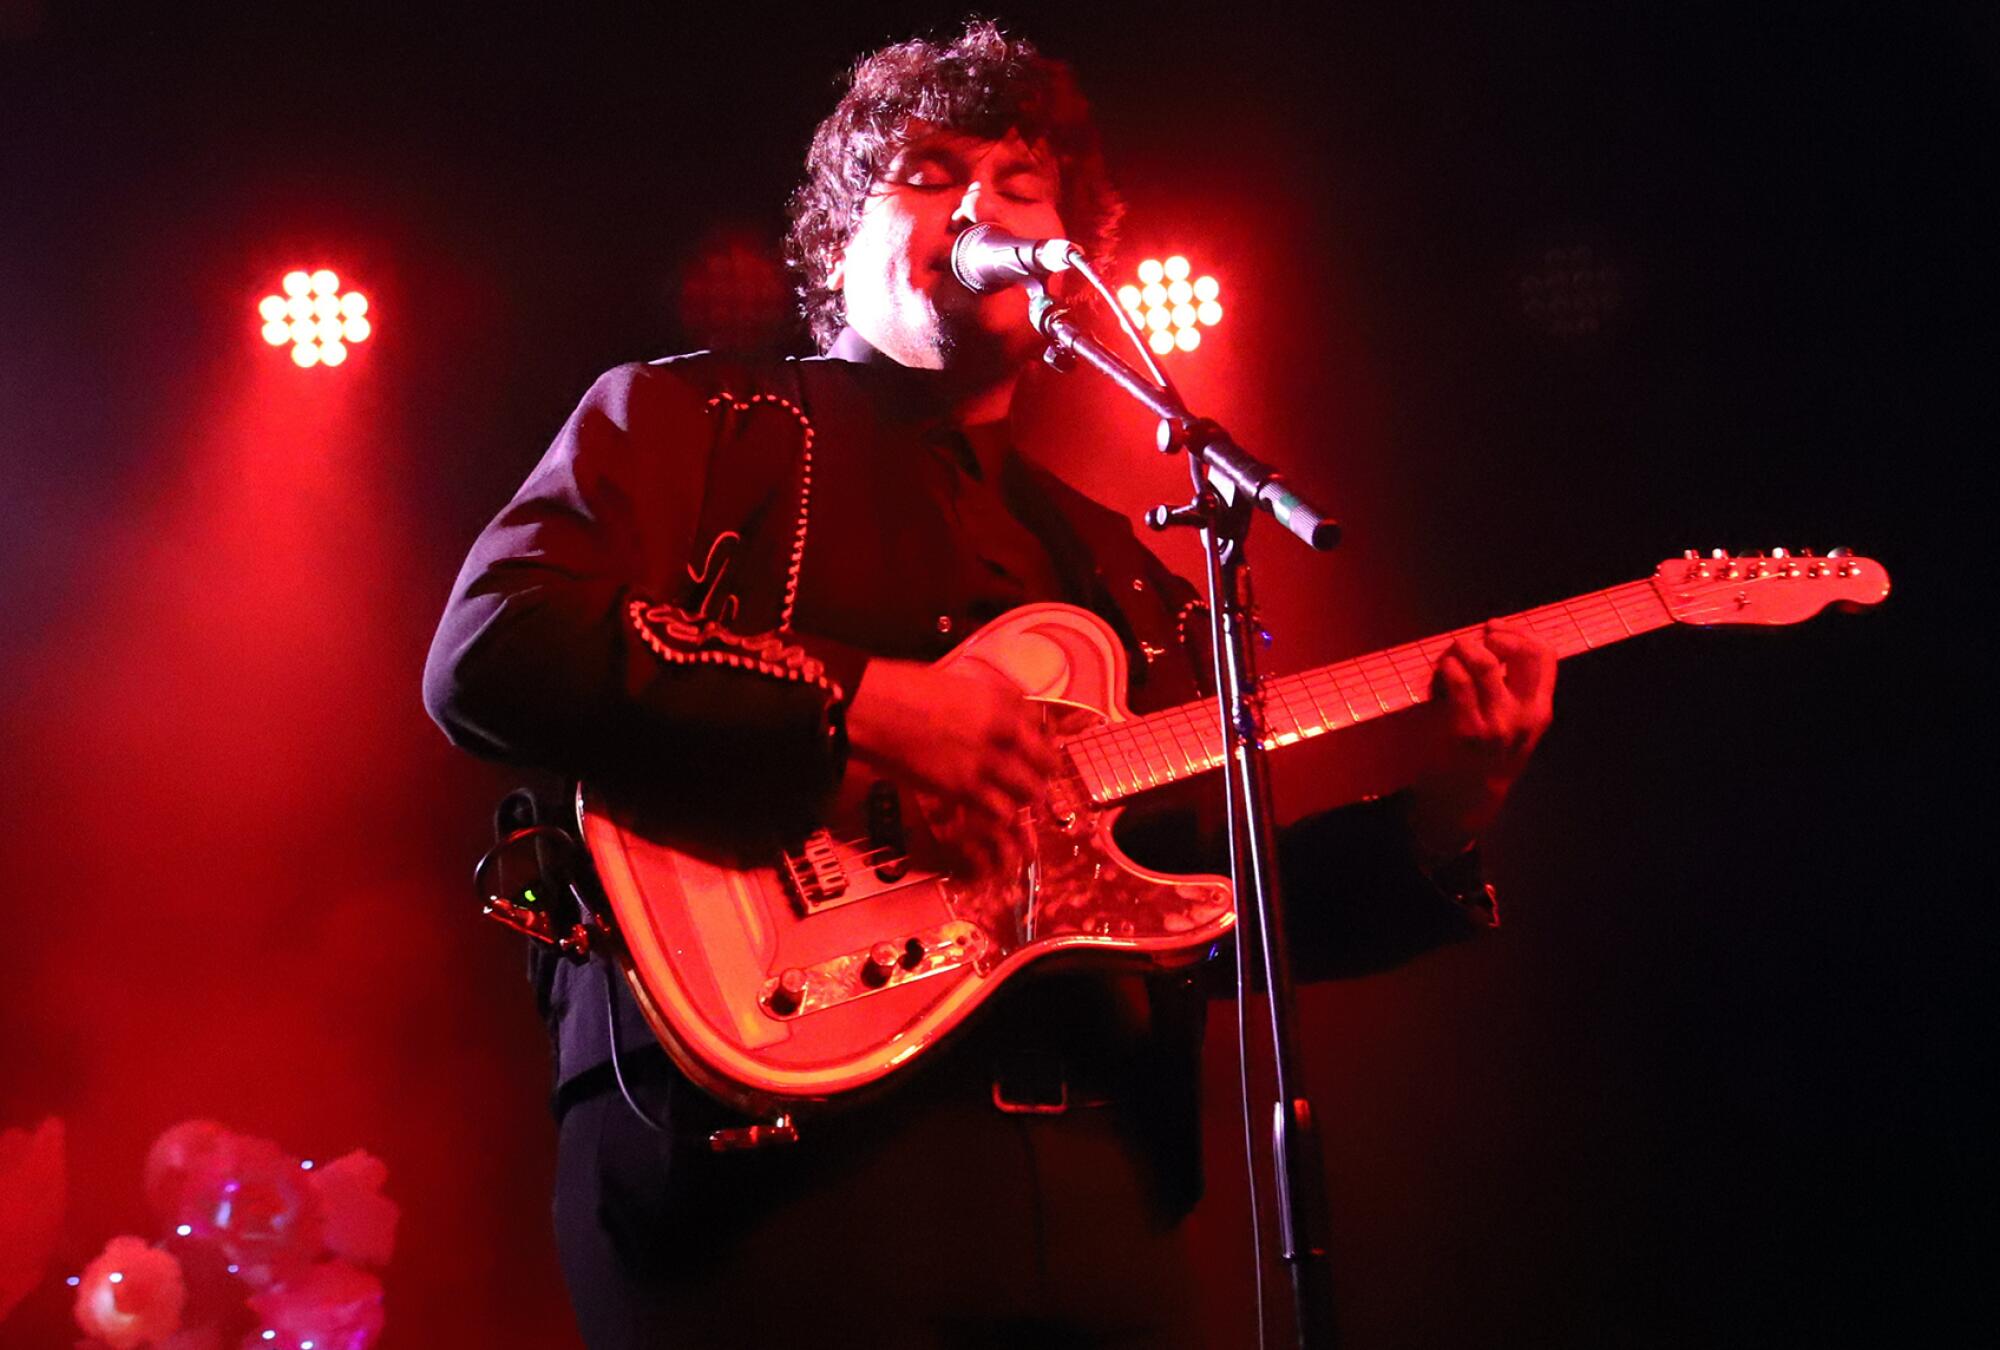 A performer bathed in red lights plays a guitar and sings into a microphone.